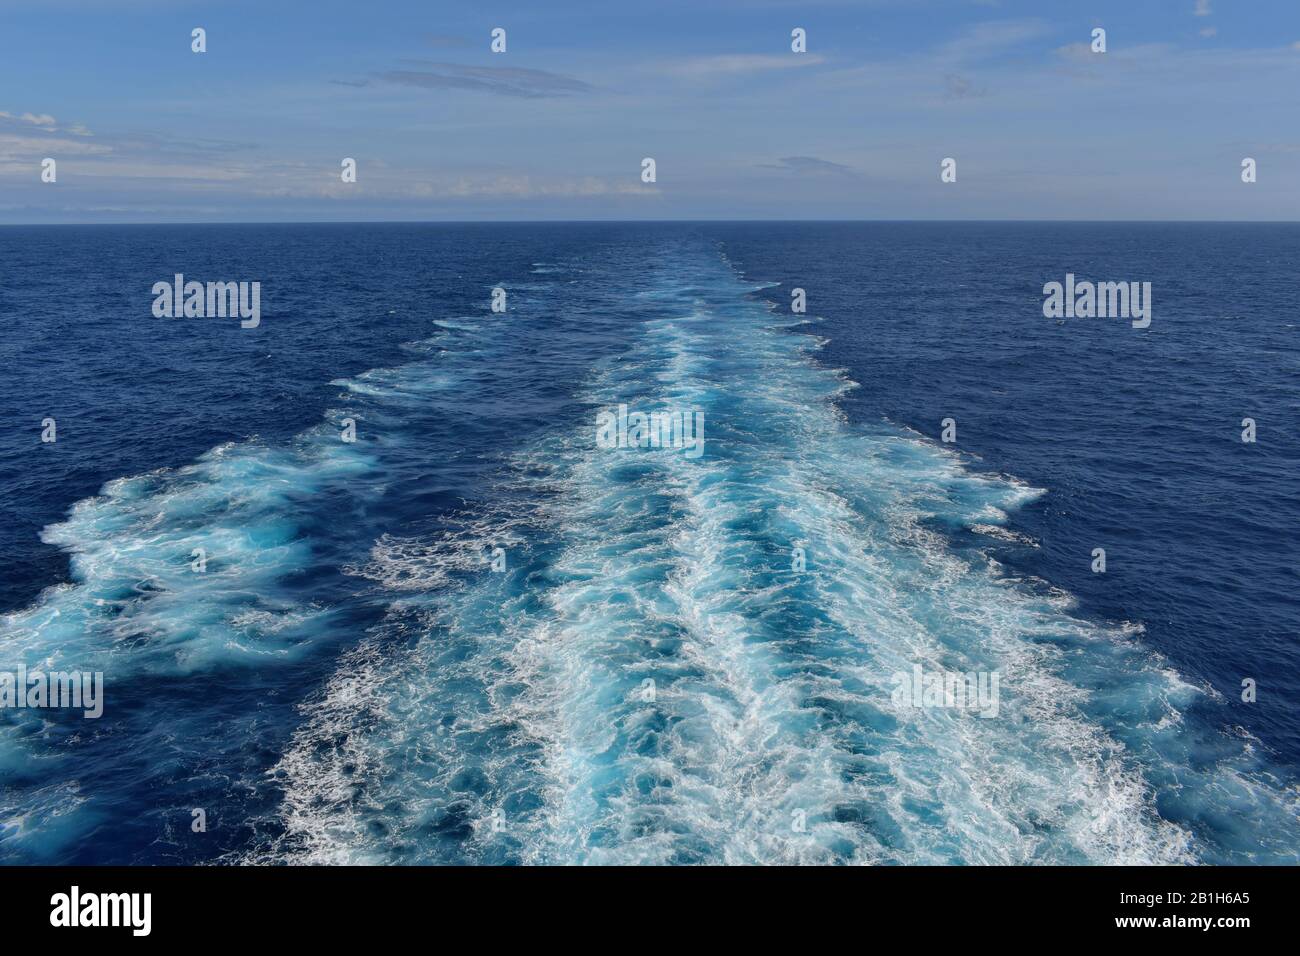 Close up of ocean wake behind cruise ship in the South Pacific Ocean. Stock Photo